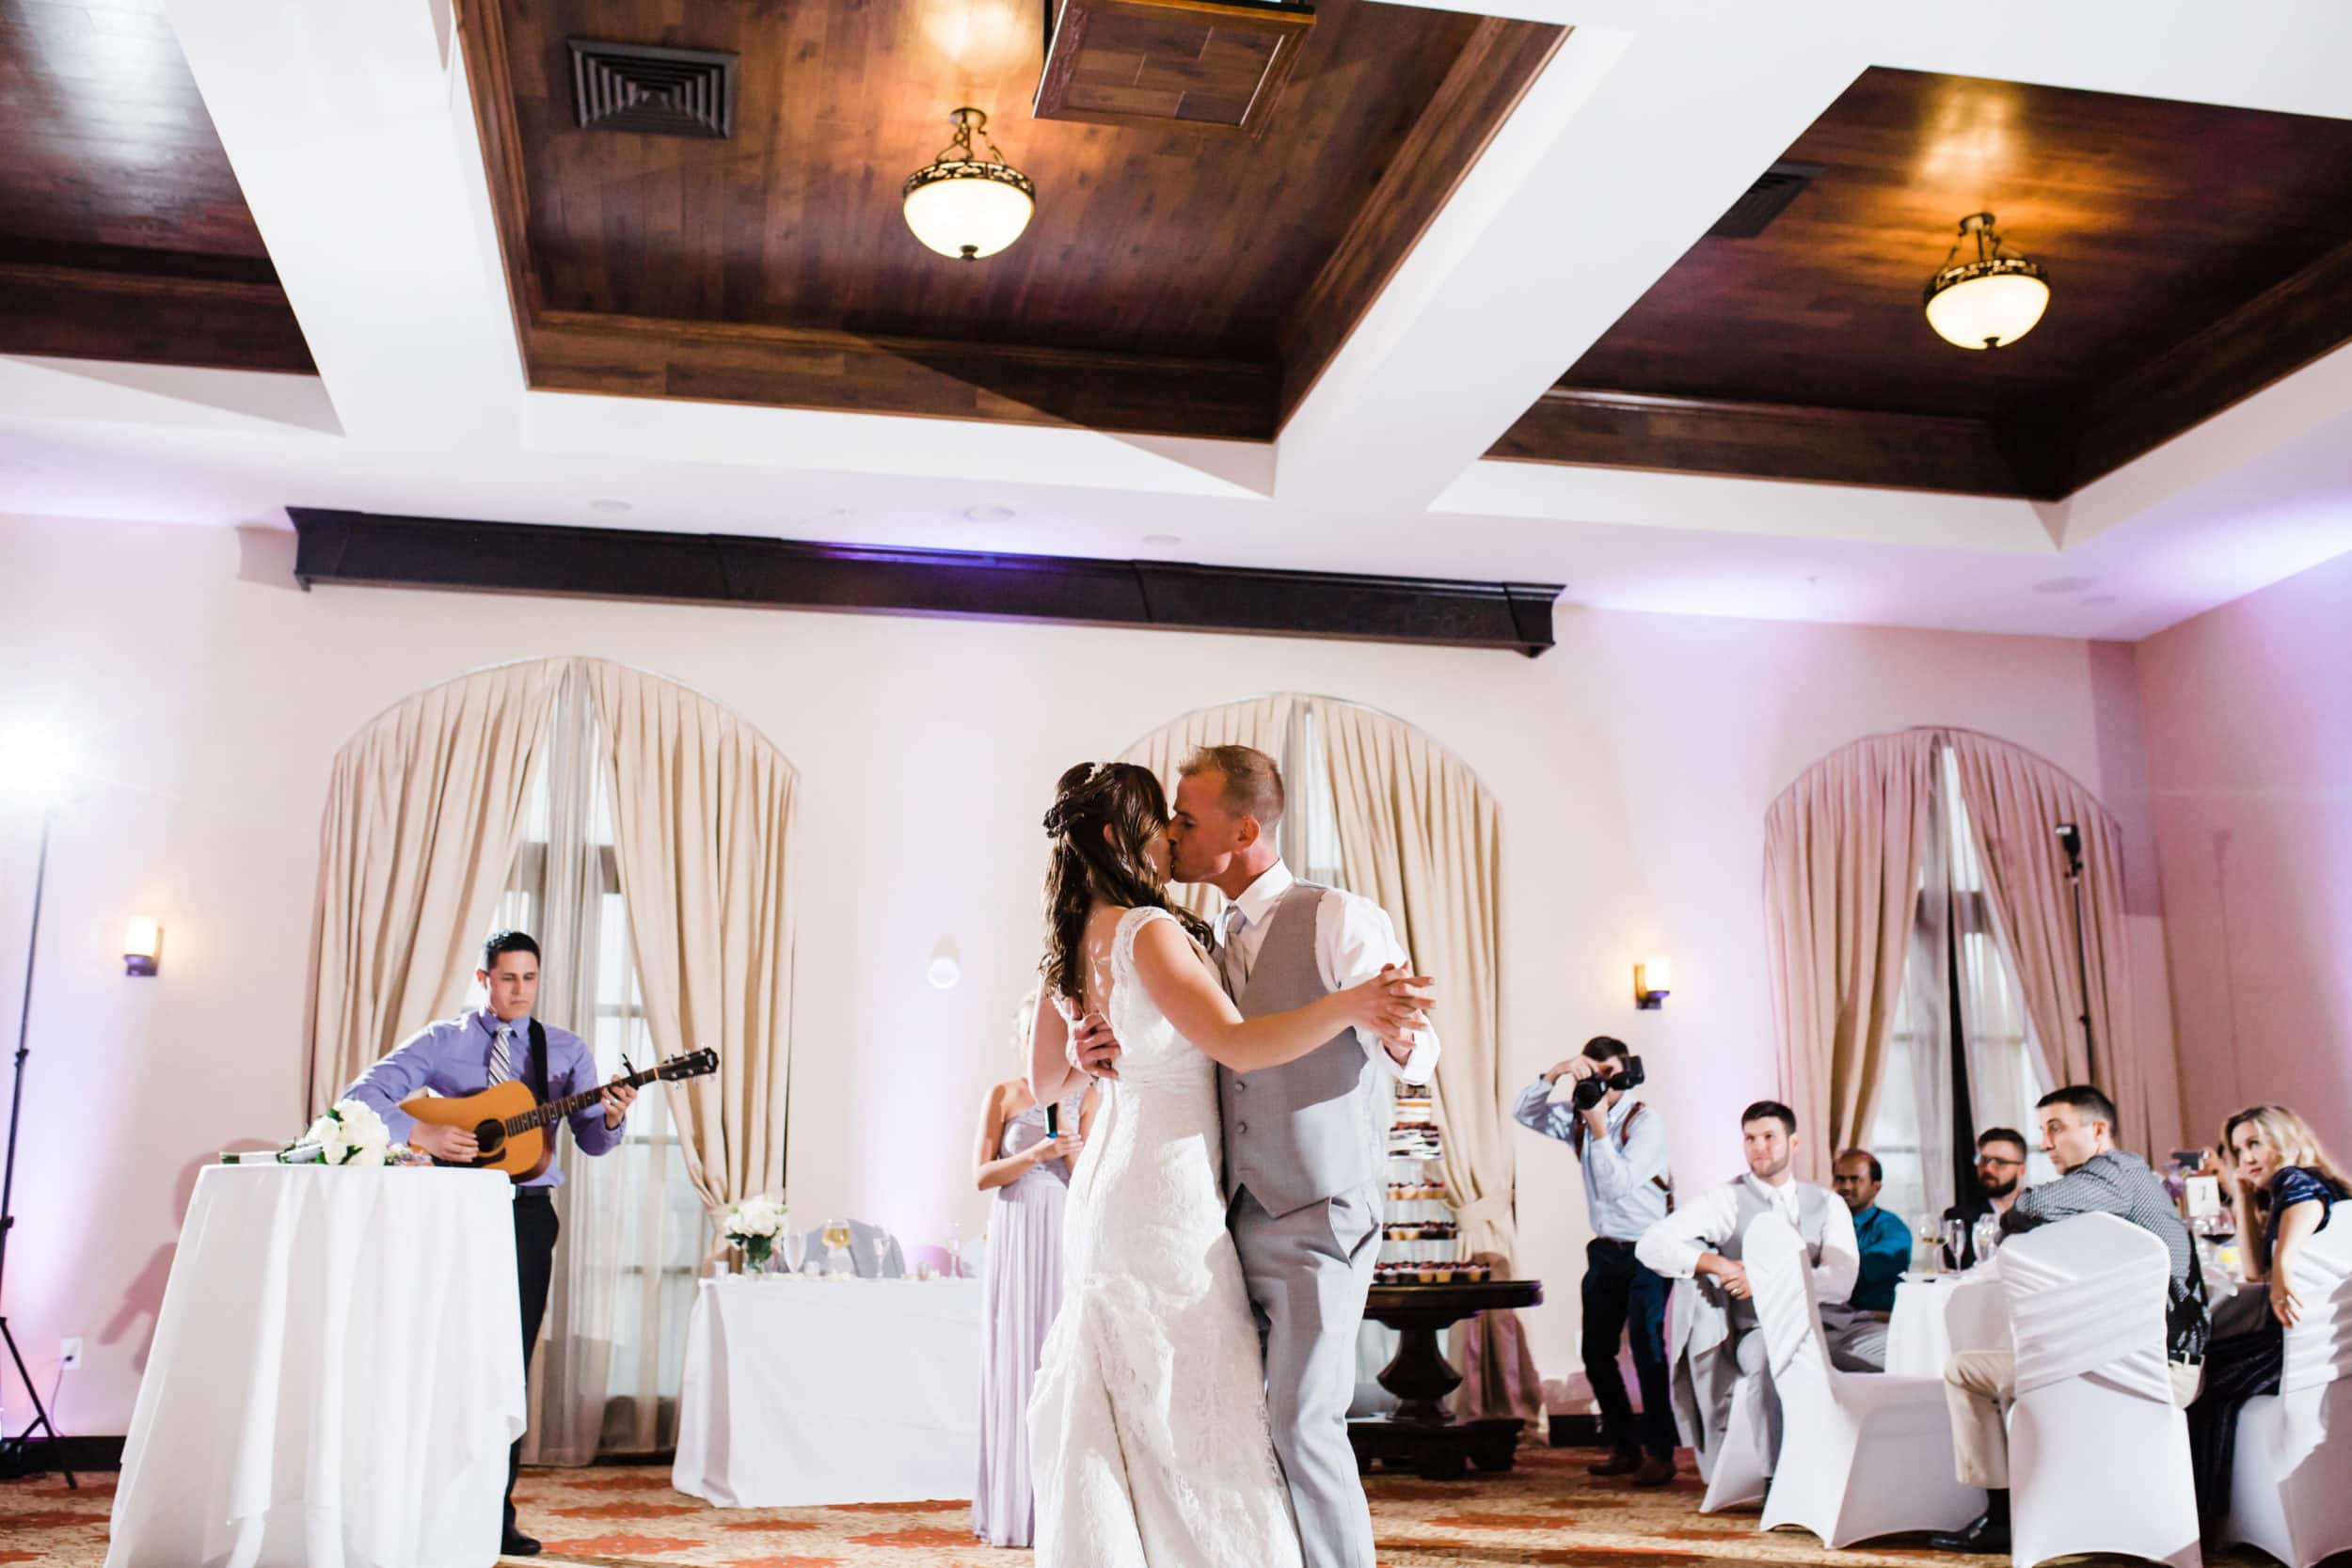 bride with white dress and groom with grey suit first dance with guitarist singing with white and wood interior with guests cheering at castillo de san marcos wedding